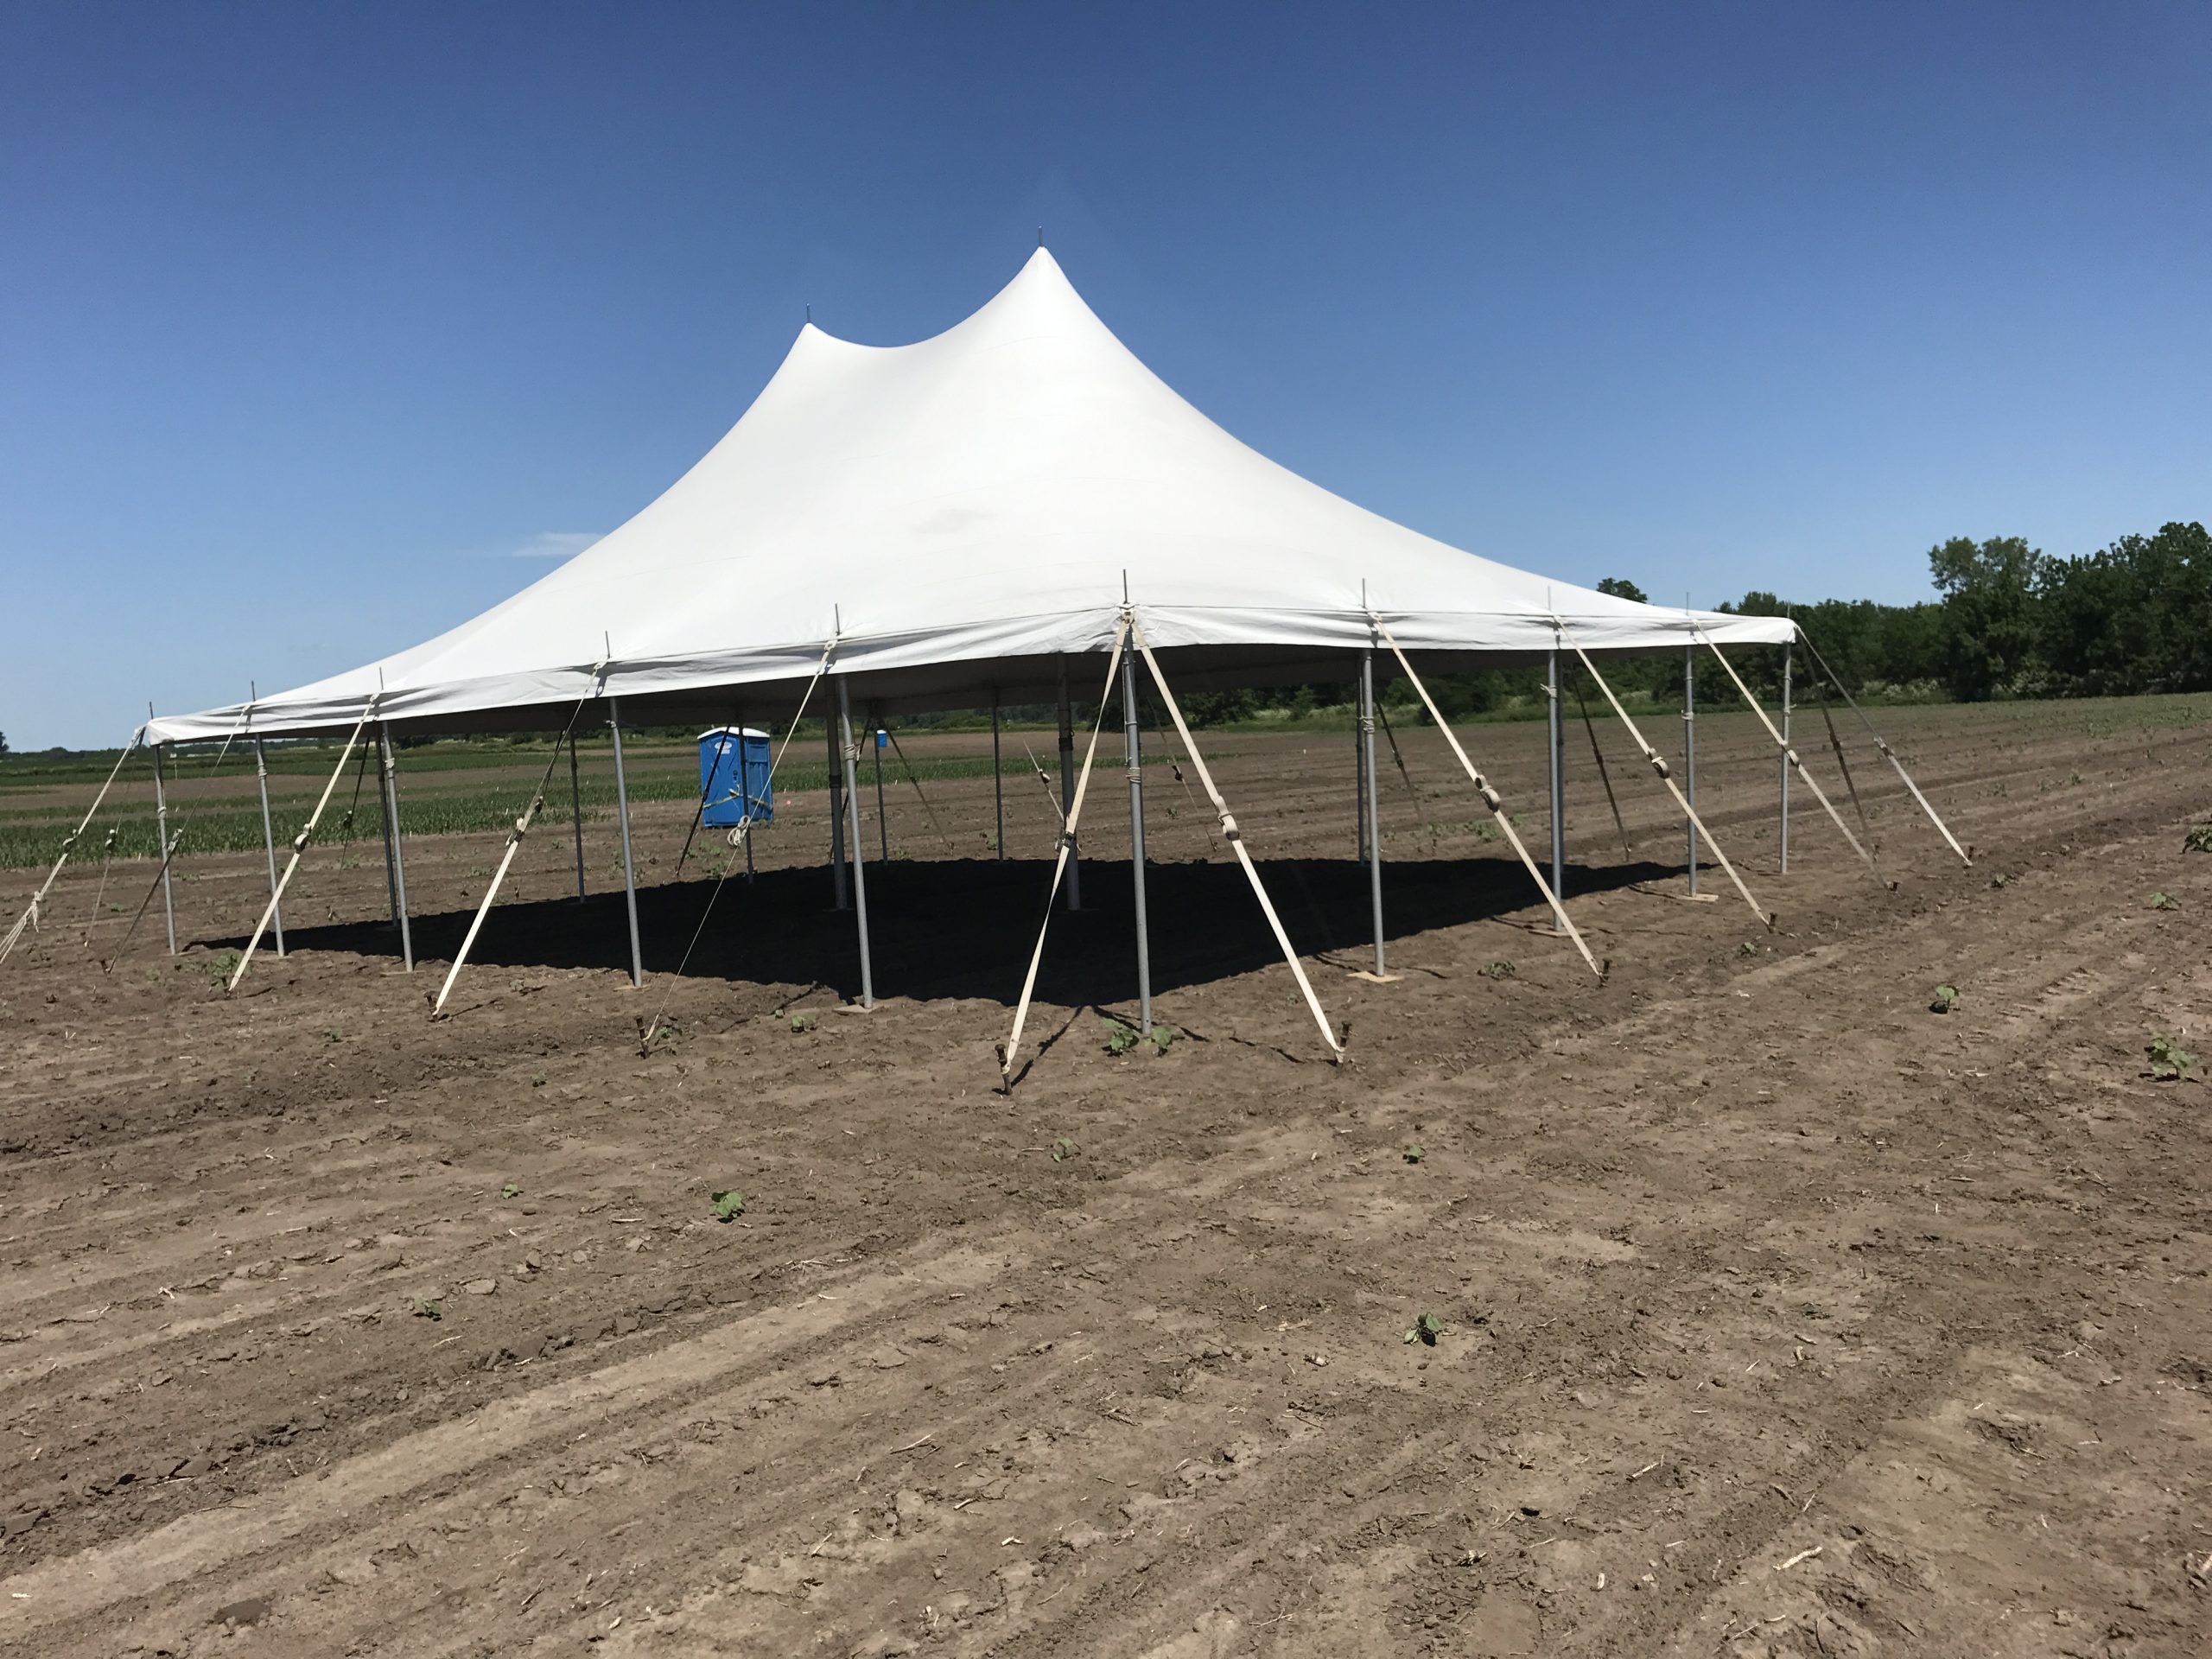 30' x 30' tent in the field for Monsanto Agrochemical Company in Marengo, Iowa